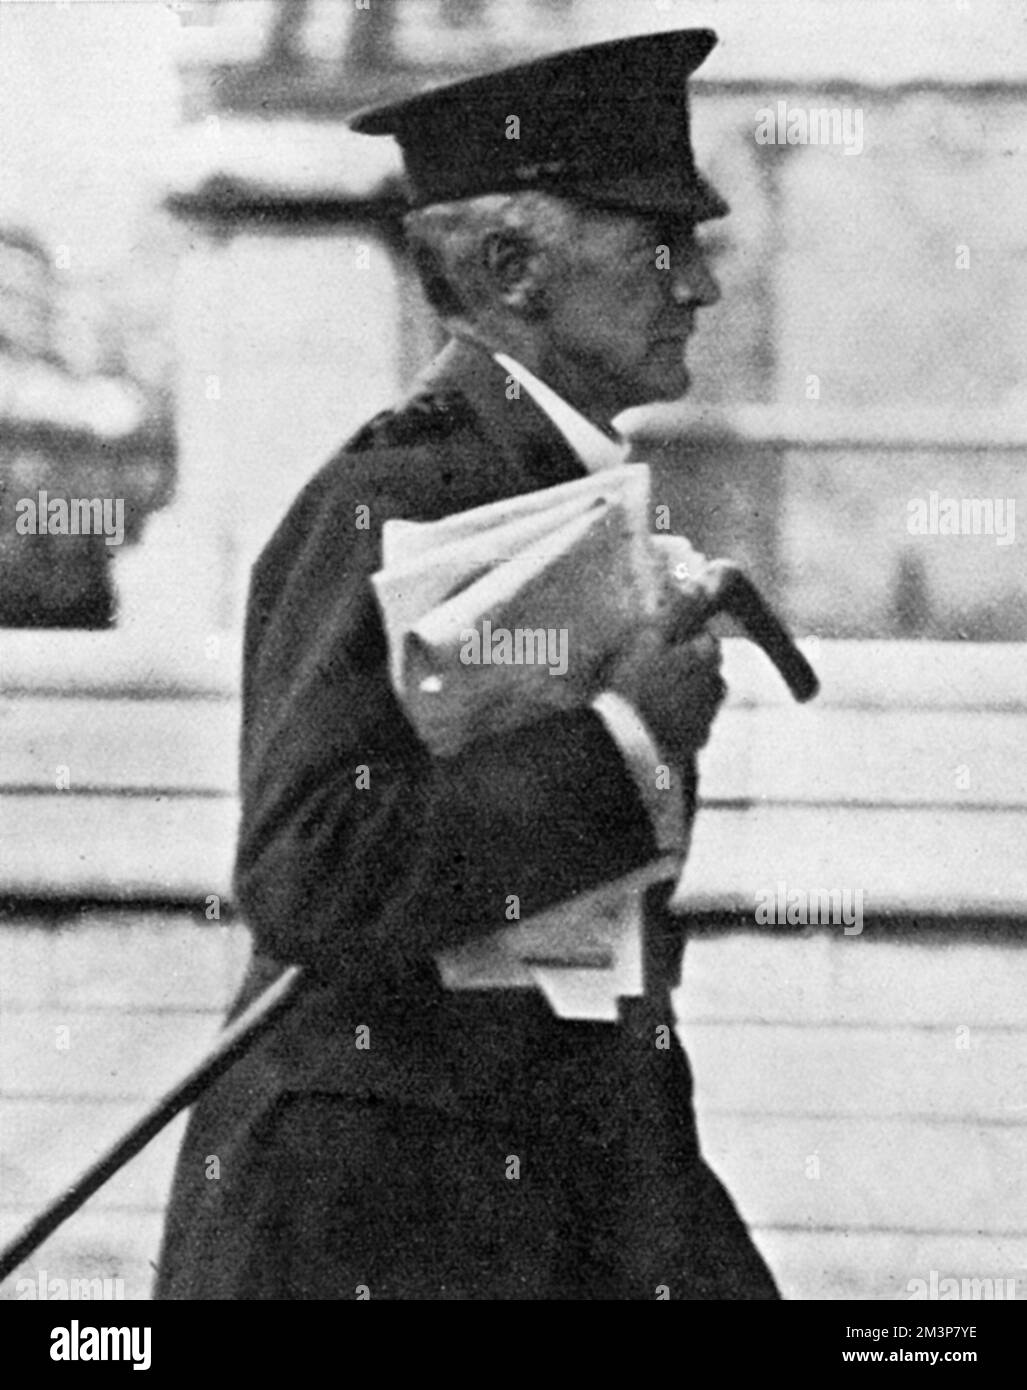 Arthur Foley Winnington-Ingram (18581946), bishop of London, wearing the uniform of the Rifle Brigade to which he was attached as chaplain in 1914.  He was an effective and tireless recruiter of volunteers in the early months of the First World War.  In 1915 he toured the western front, in 1916 the Grand Fleet at Rosyth and Scapa Flow, and in 1918 Salonica.  He had a profound belief in the just cause of the war and spoke fervently and tirelessly against German atrocities to the point of xenophoba.  Asquith commented that Winnington-Ingram's views were, 'jingoism of the shallowest kind.'  The T Stock Photo